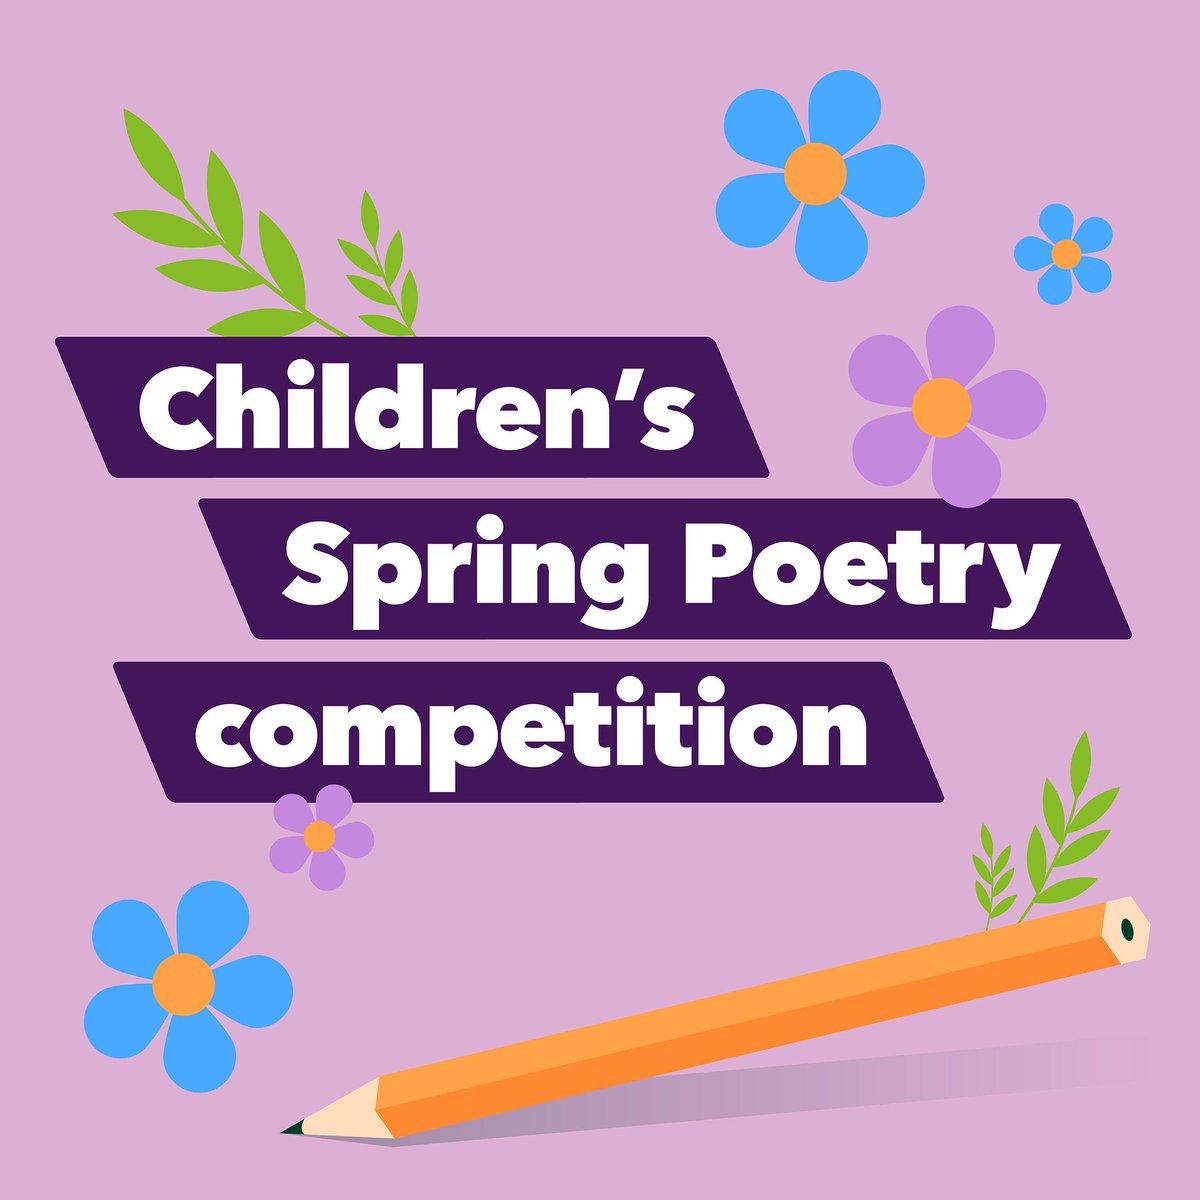 There's still time to enter your poem into our competition, which is being judged by @JosephACoelho 📗. 10 winning poems will go on display across our network this summer. For full T&Cs and to enter, visit greatnorthernrail.com/poetryinmotion (open to children aged between 5 & 13). Good luck!